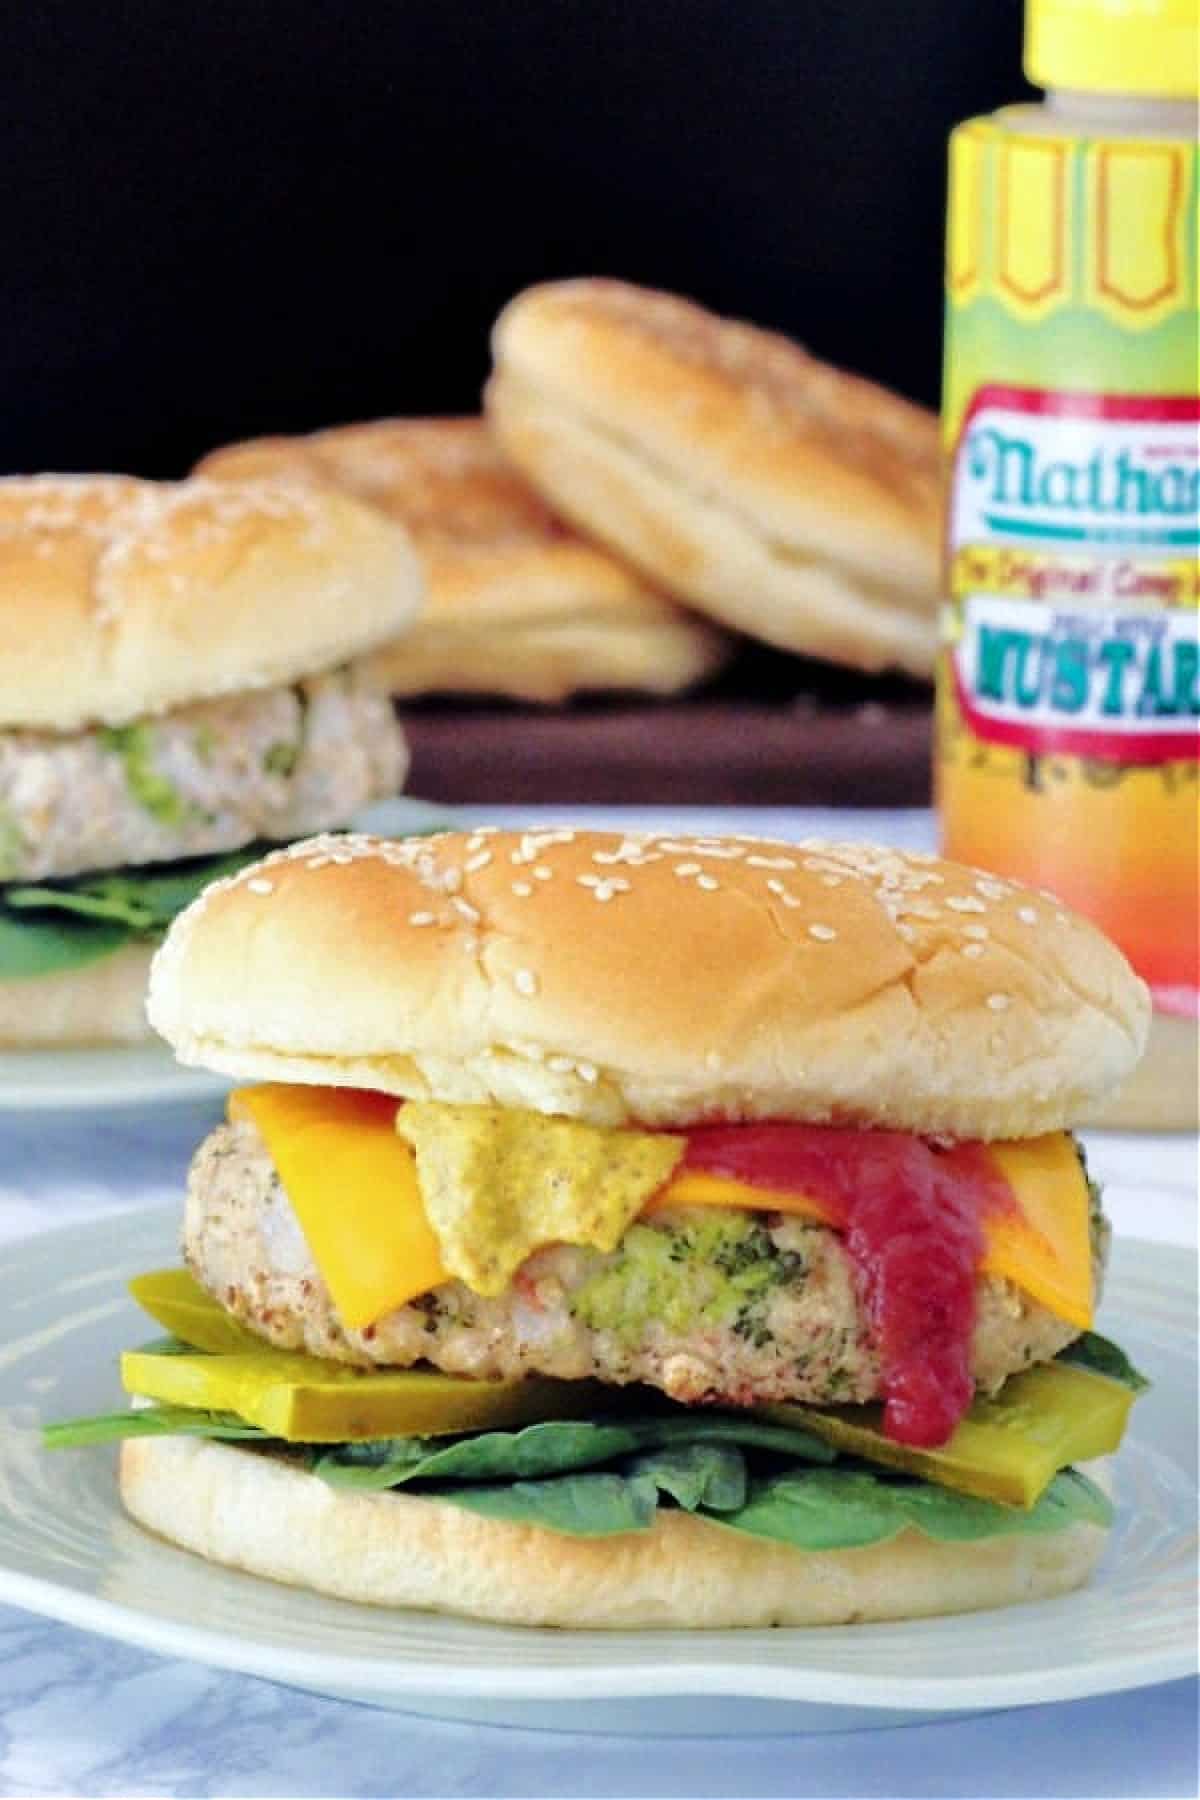 a vegan veggie burger on a plate, dressed with spinach, pickles, cheddar slice, ketchup and mustard. bottle of mustard and more burgers and buns in background, against a solid black background